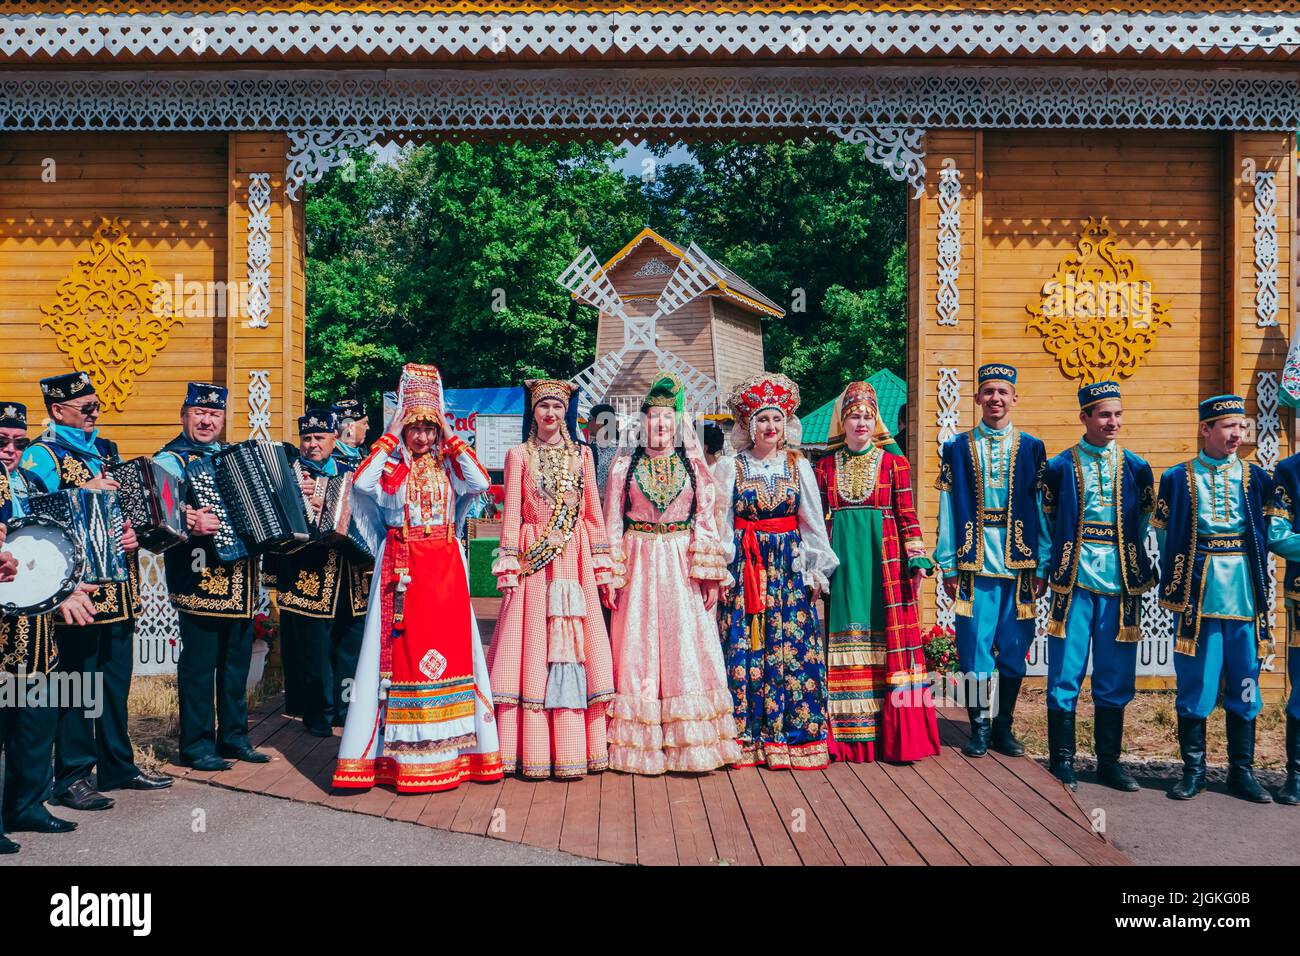 Kazan, Russia. June 19, 2022. Celebration of Sabantuy. A folk Tatar and Bashkir festival of field work. Men and women in national Tatar costumes at the gate of a traditional wooden house. Stock Photo